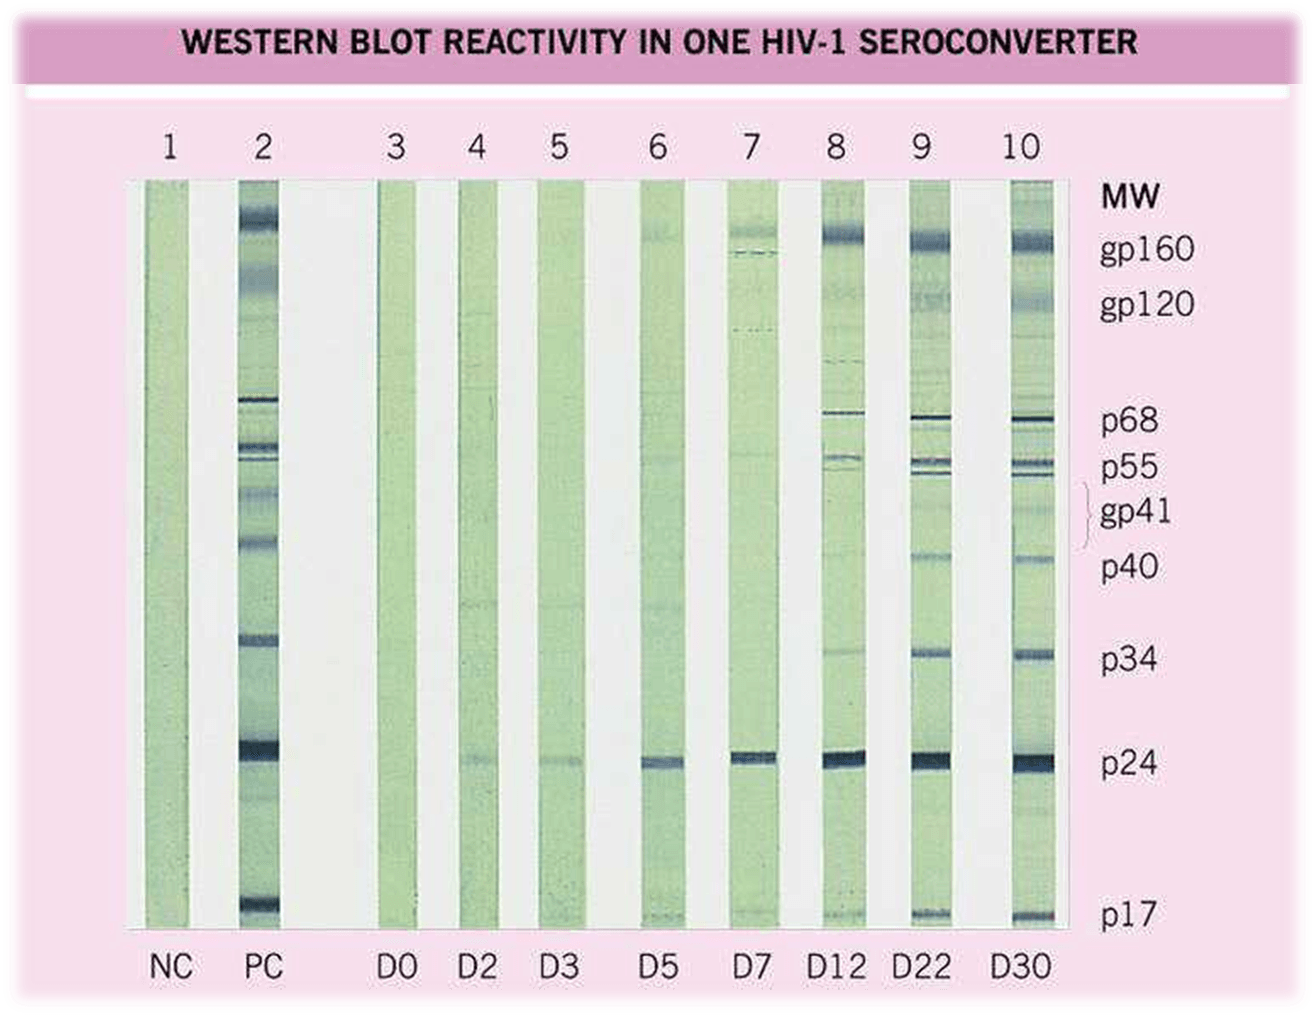 Western Blot Test for HIV diagnosis 